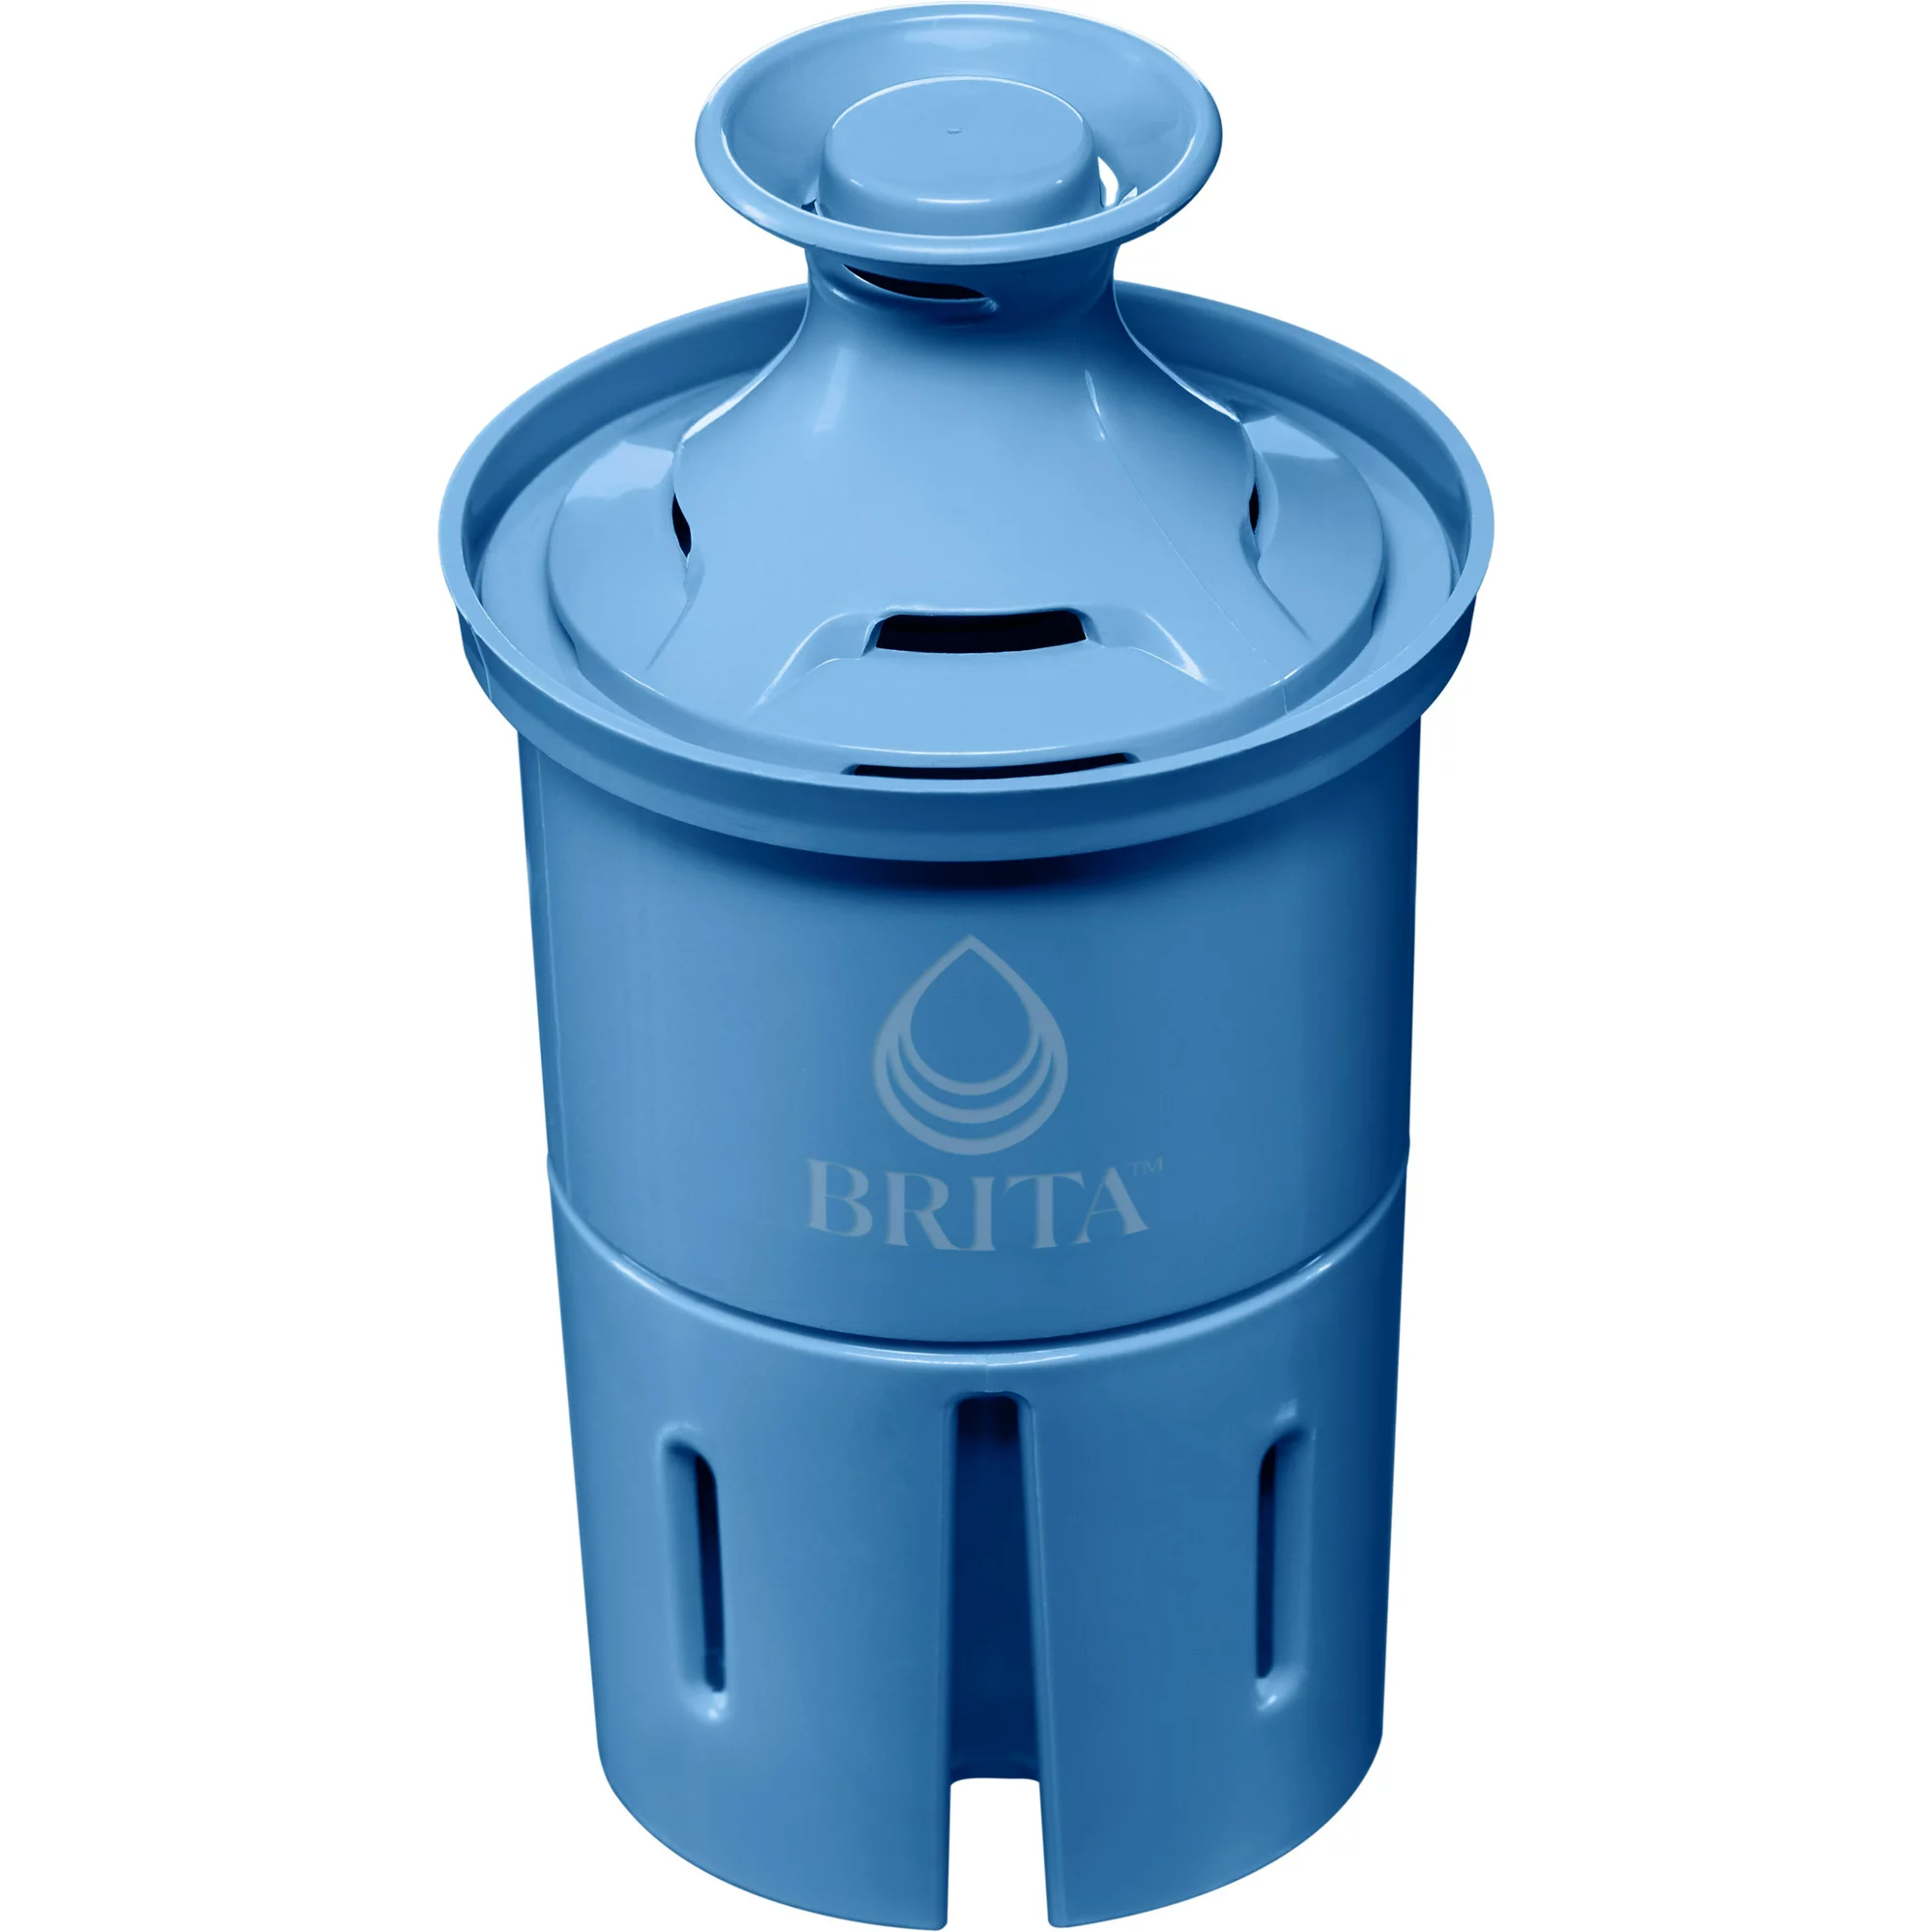 Enjoy clean and refreshing water on the go and save $4.00 on any one Brita Pitcher, Filtering Bottle, or Standard Filter, 3ct+!